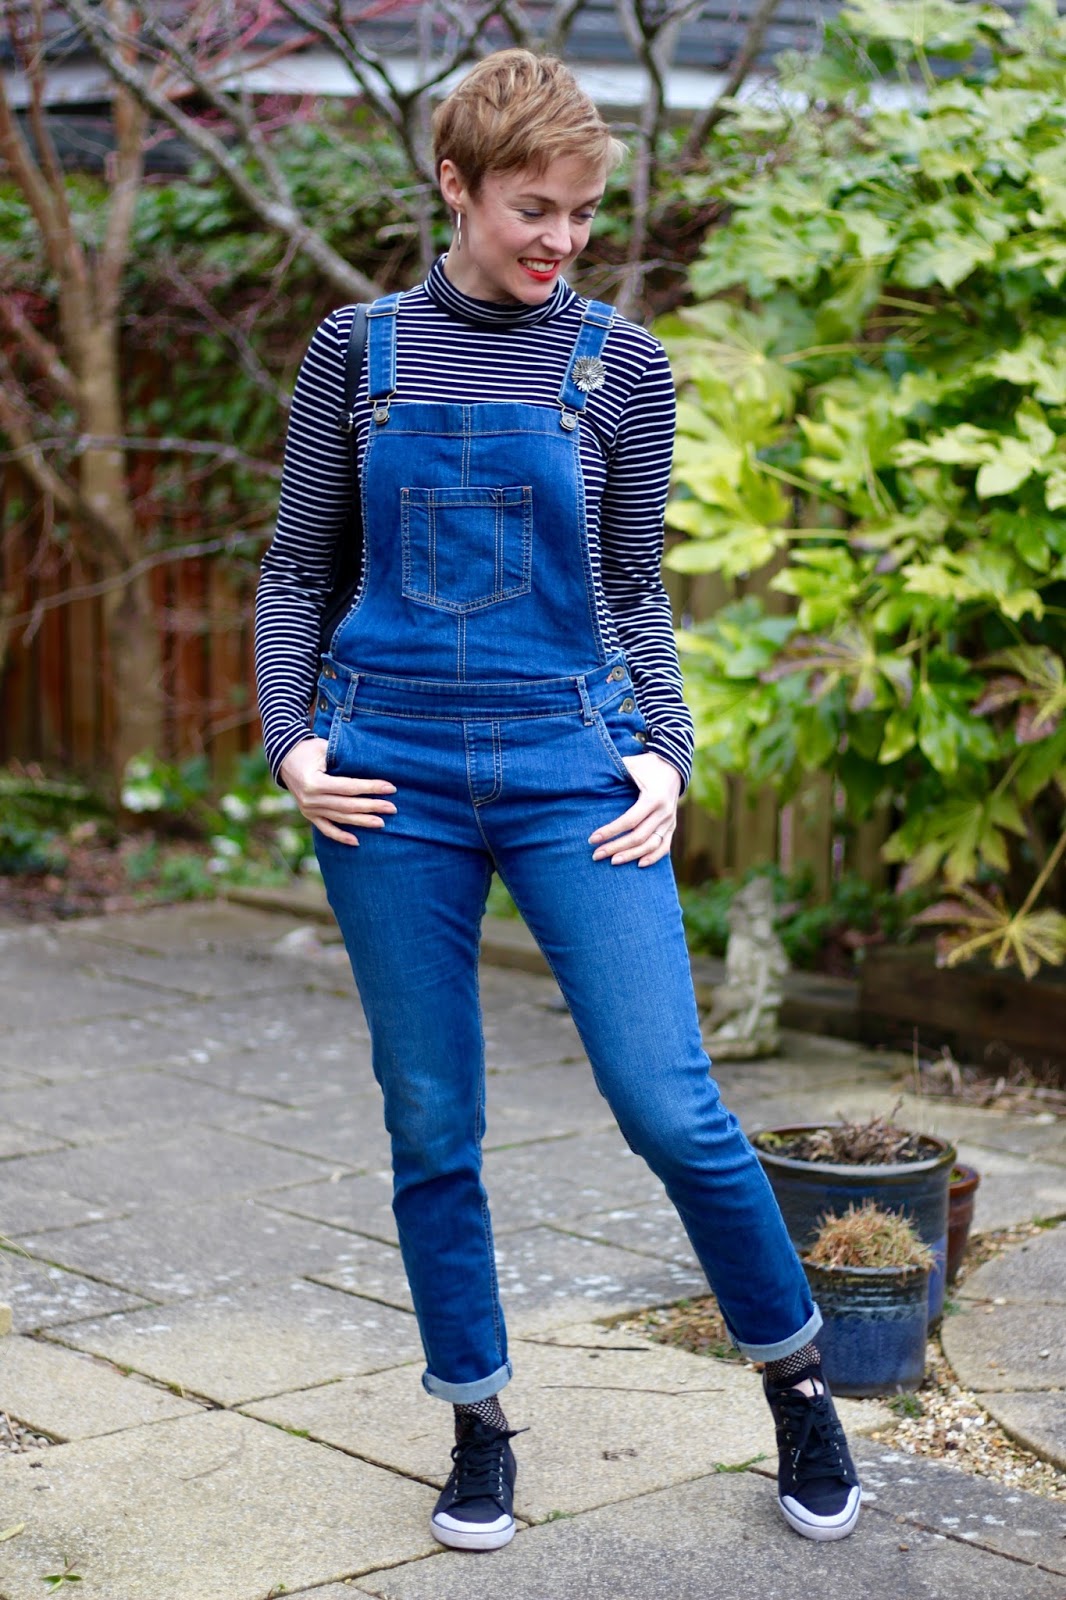 Dungarees, Stripes, Hoops, Fishnet and Short Hair, over 40 | Fake Fabulous